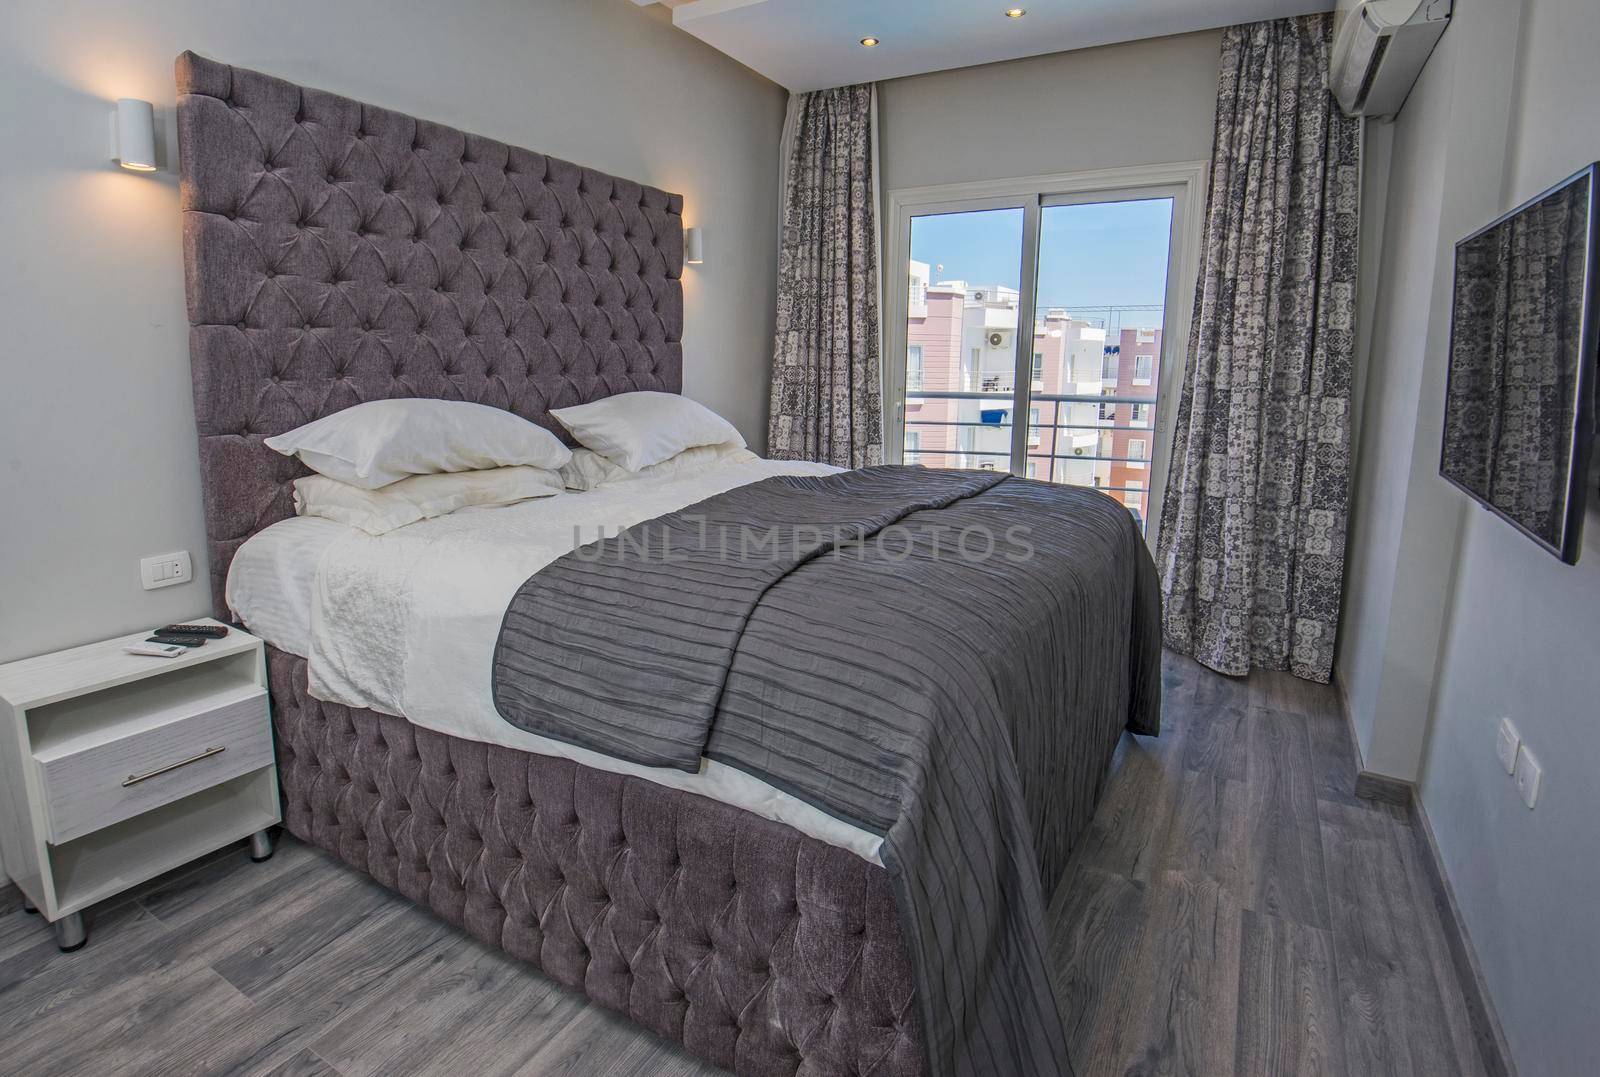 Interior design decor furnishing of luxury show home bedroom showing furniture and double bed in resort with outdoor balcony area